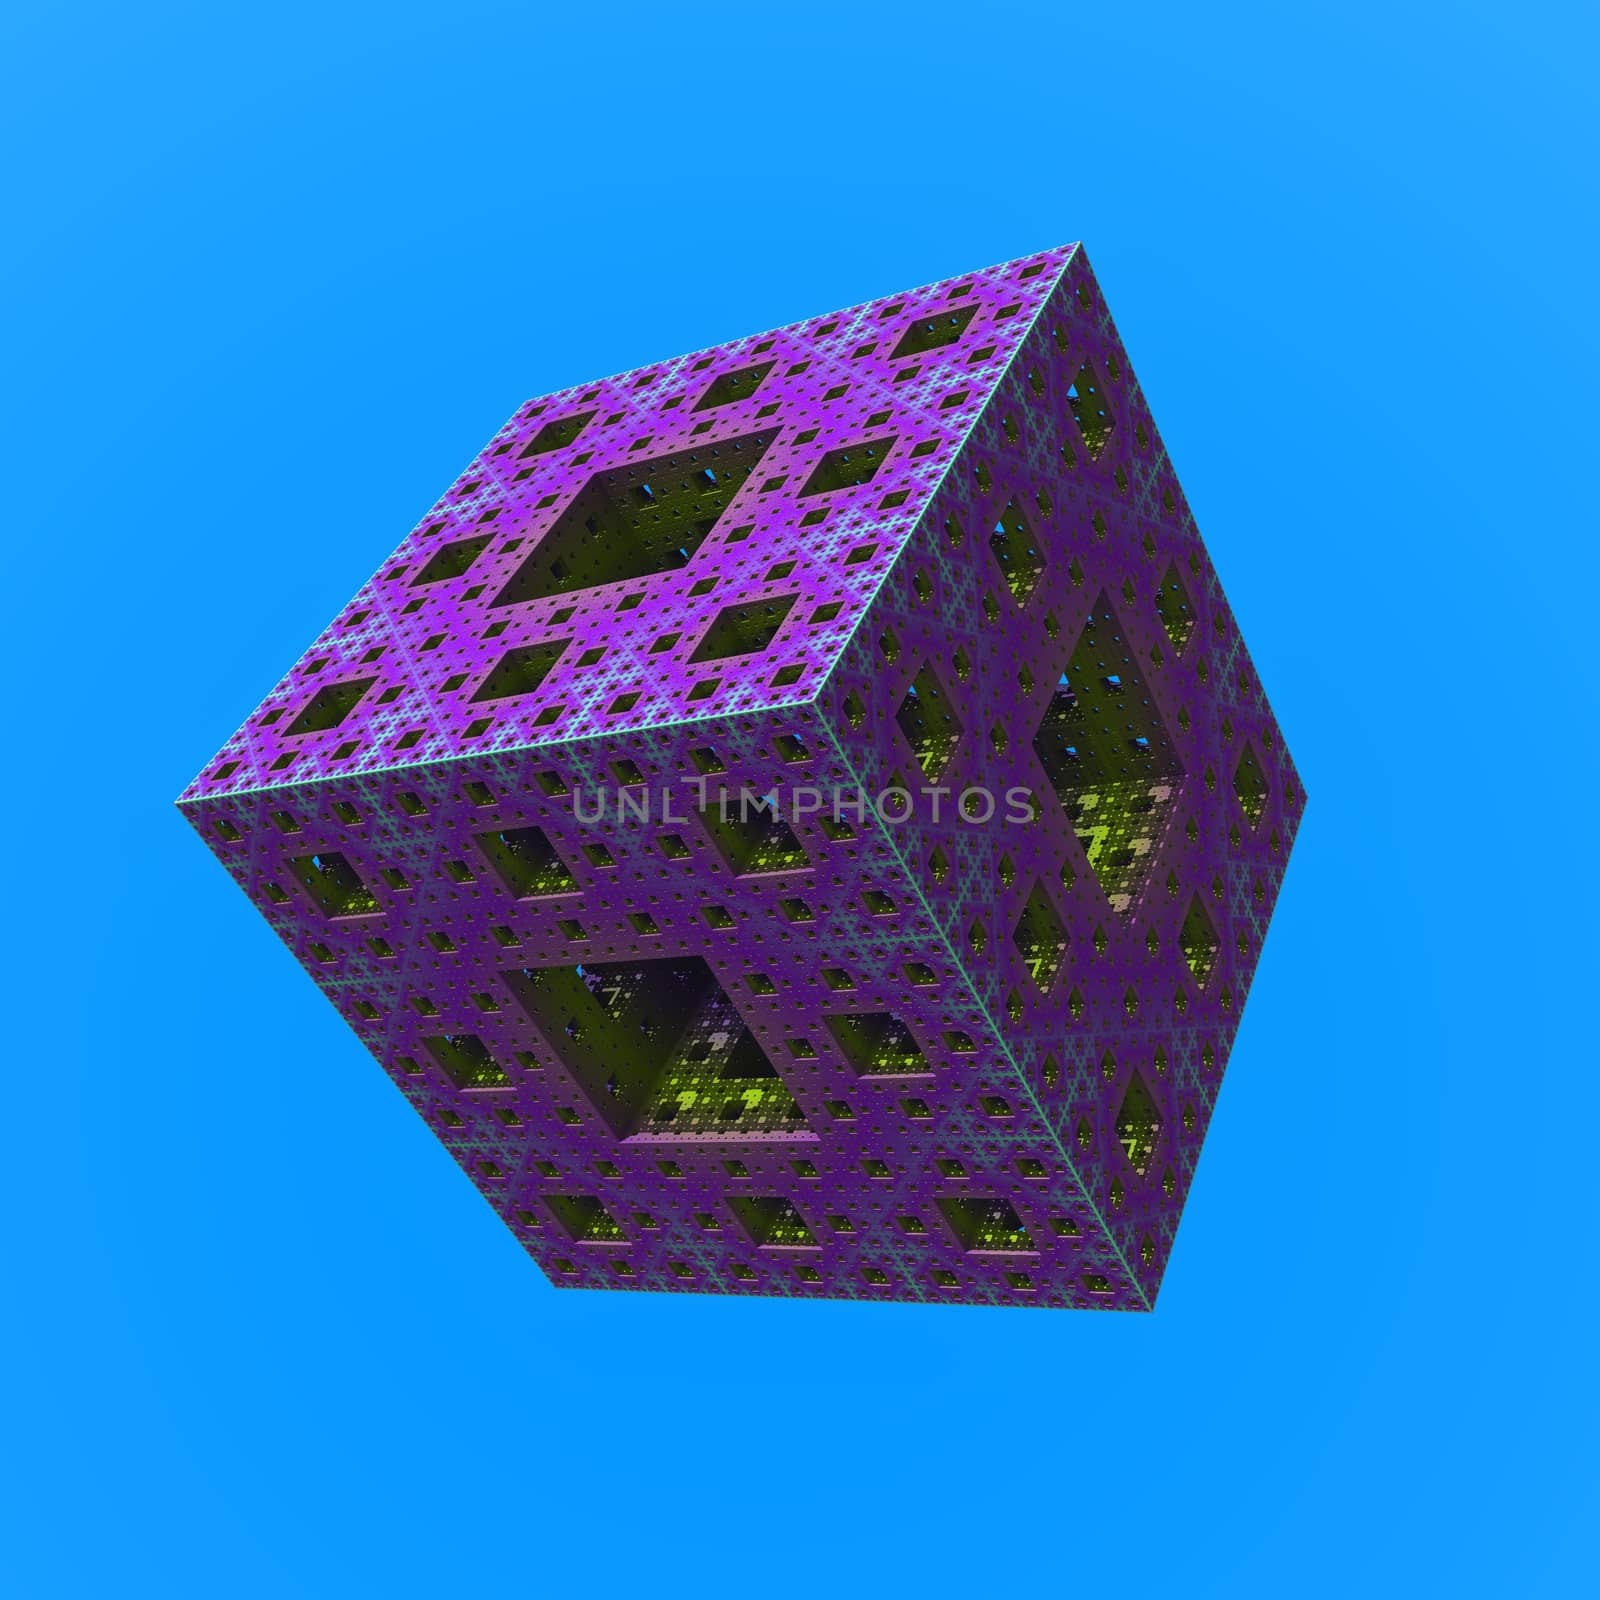 Cube by applesstock